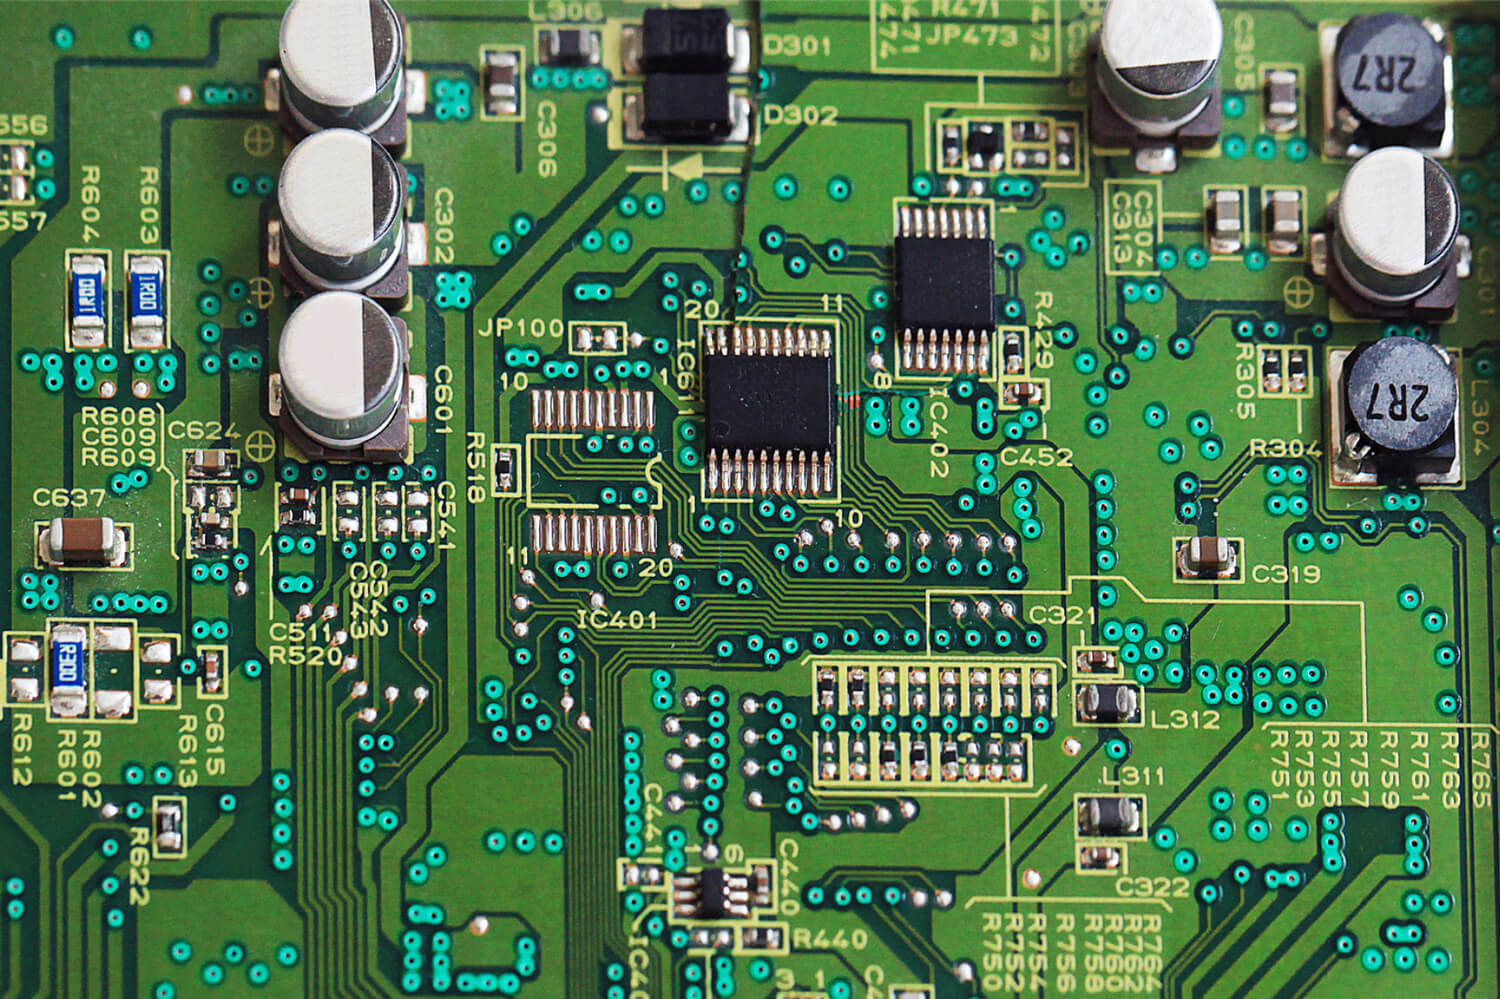 Turnkey PCB Assembly means we can help with your PCB start to finish!